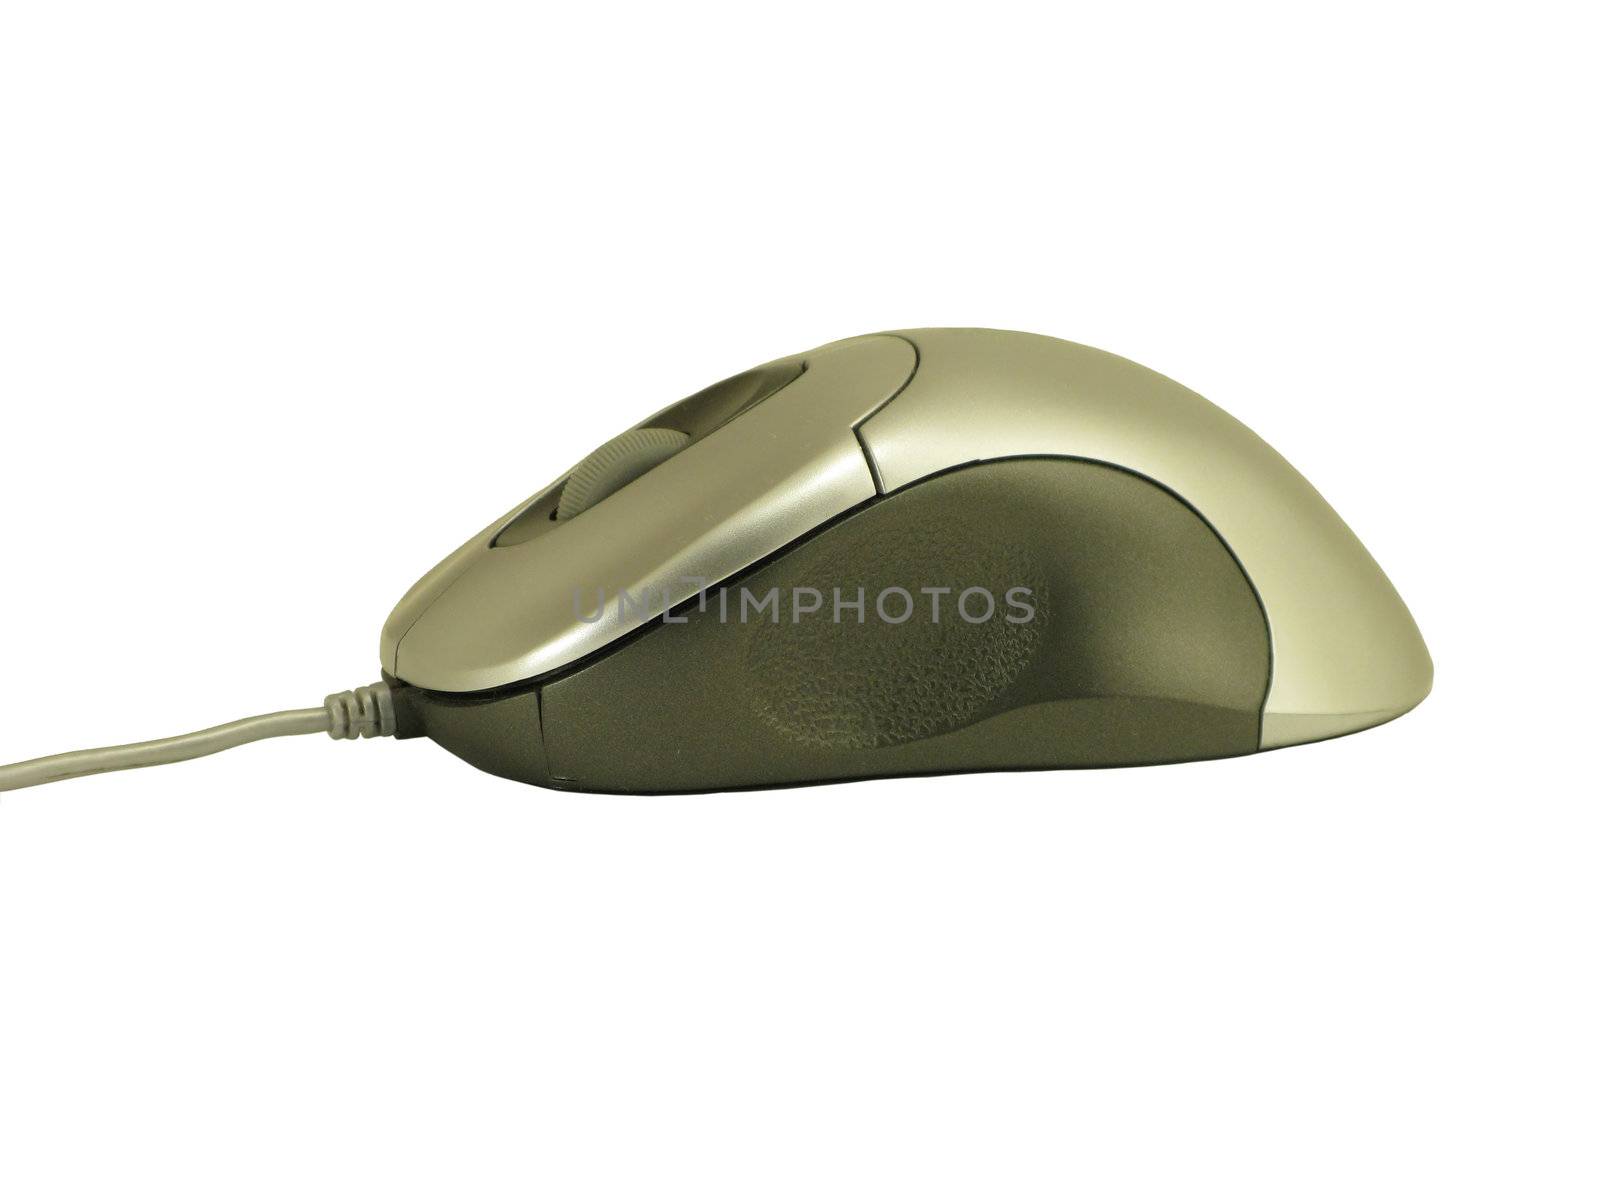 Optical computer mouse with scrollwheel isolated on white